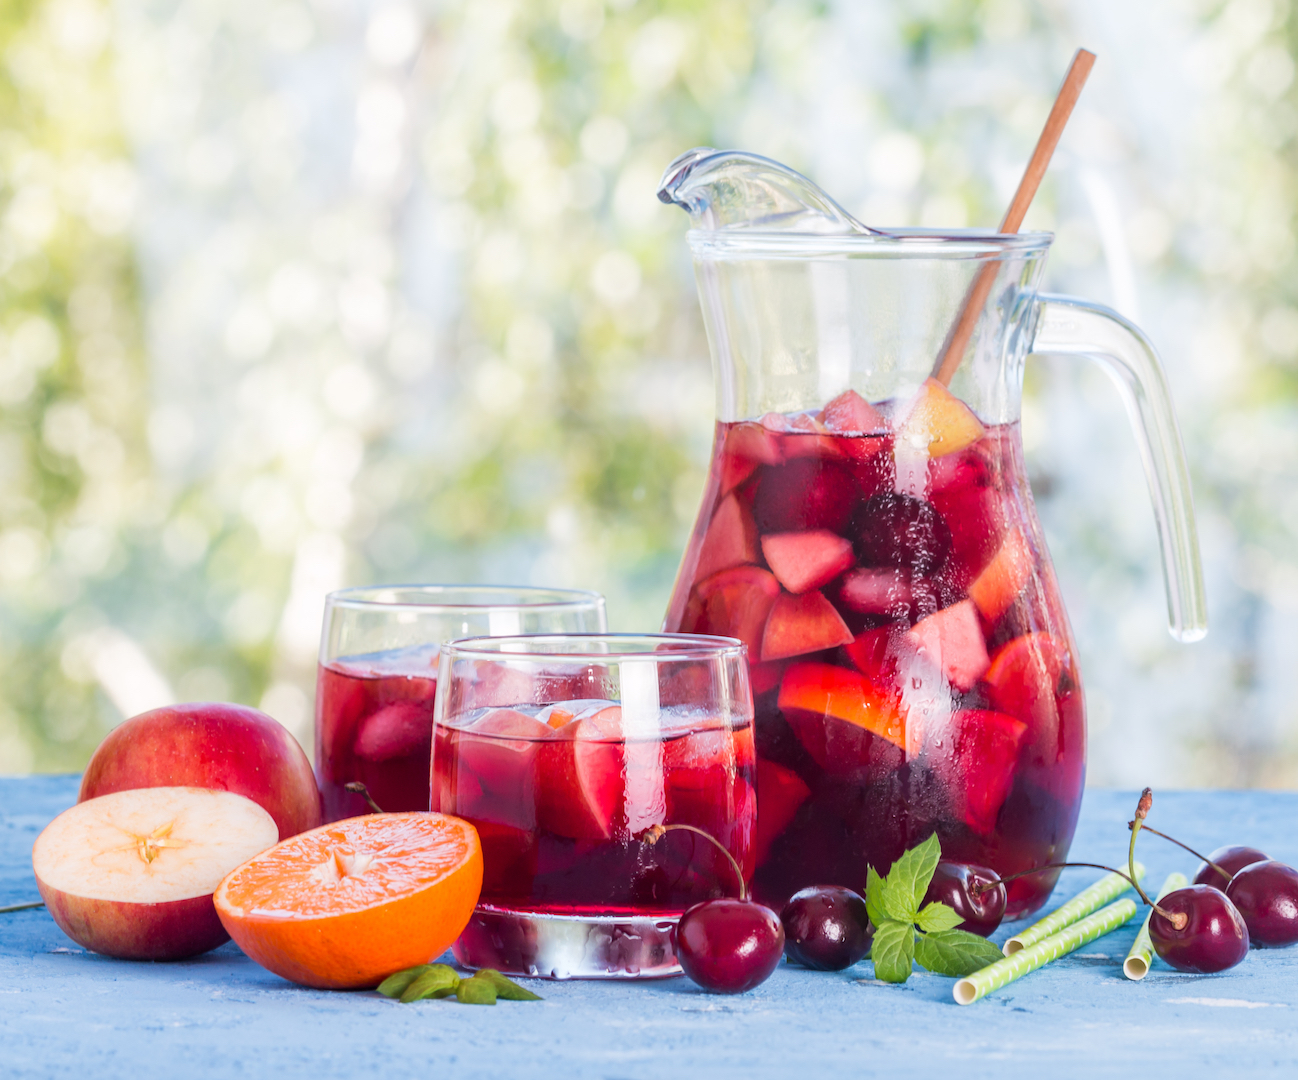 Glasses of red sangria